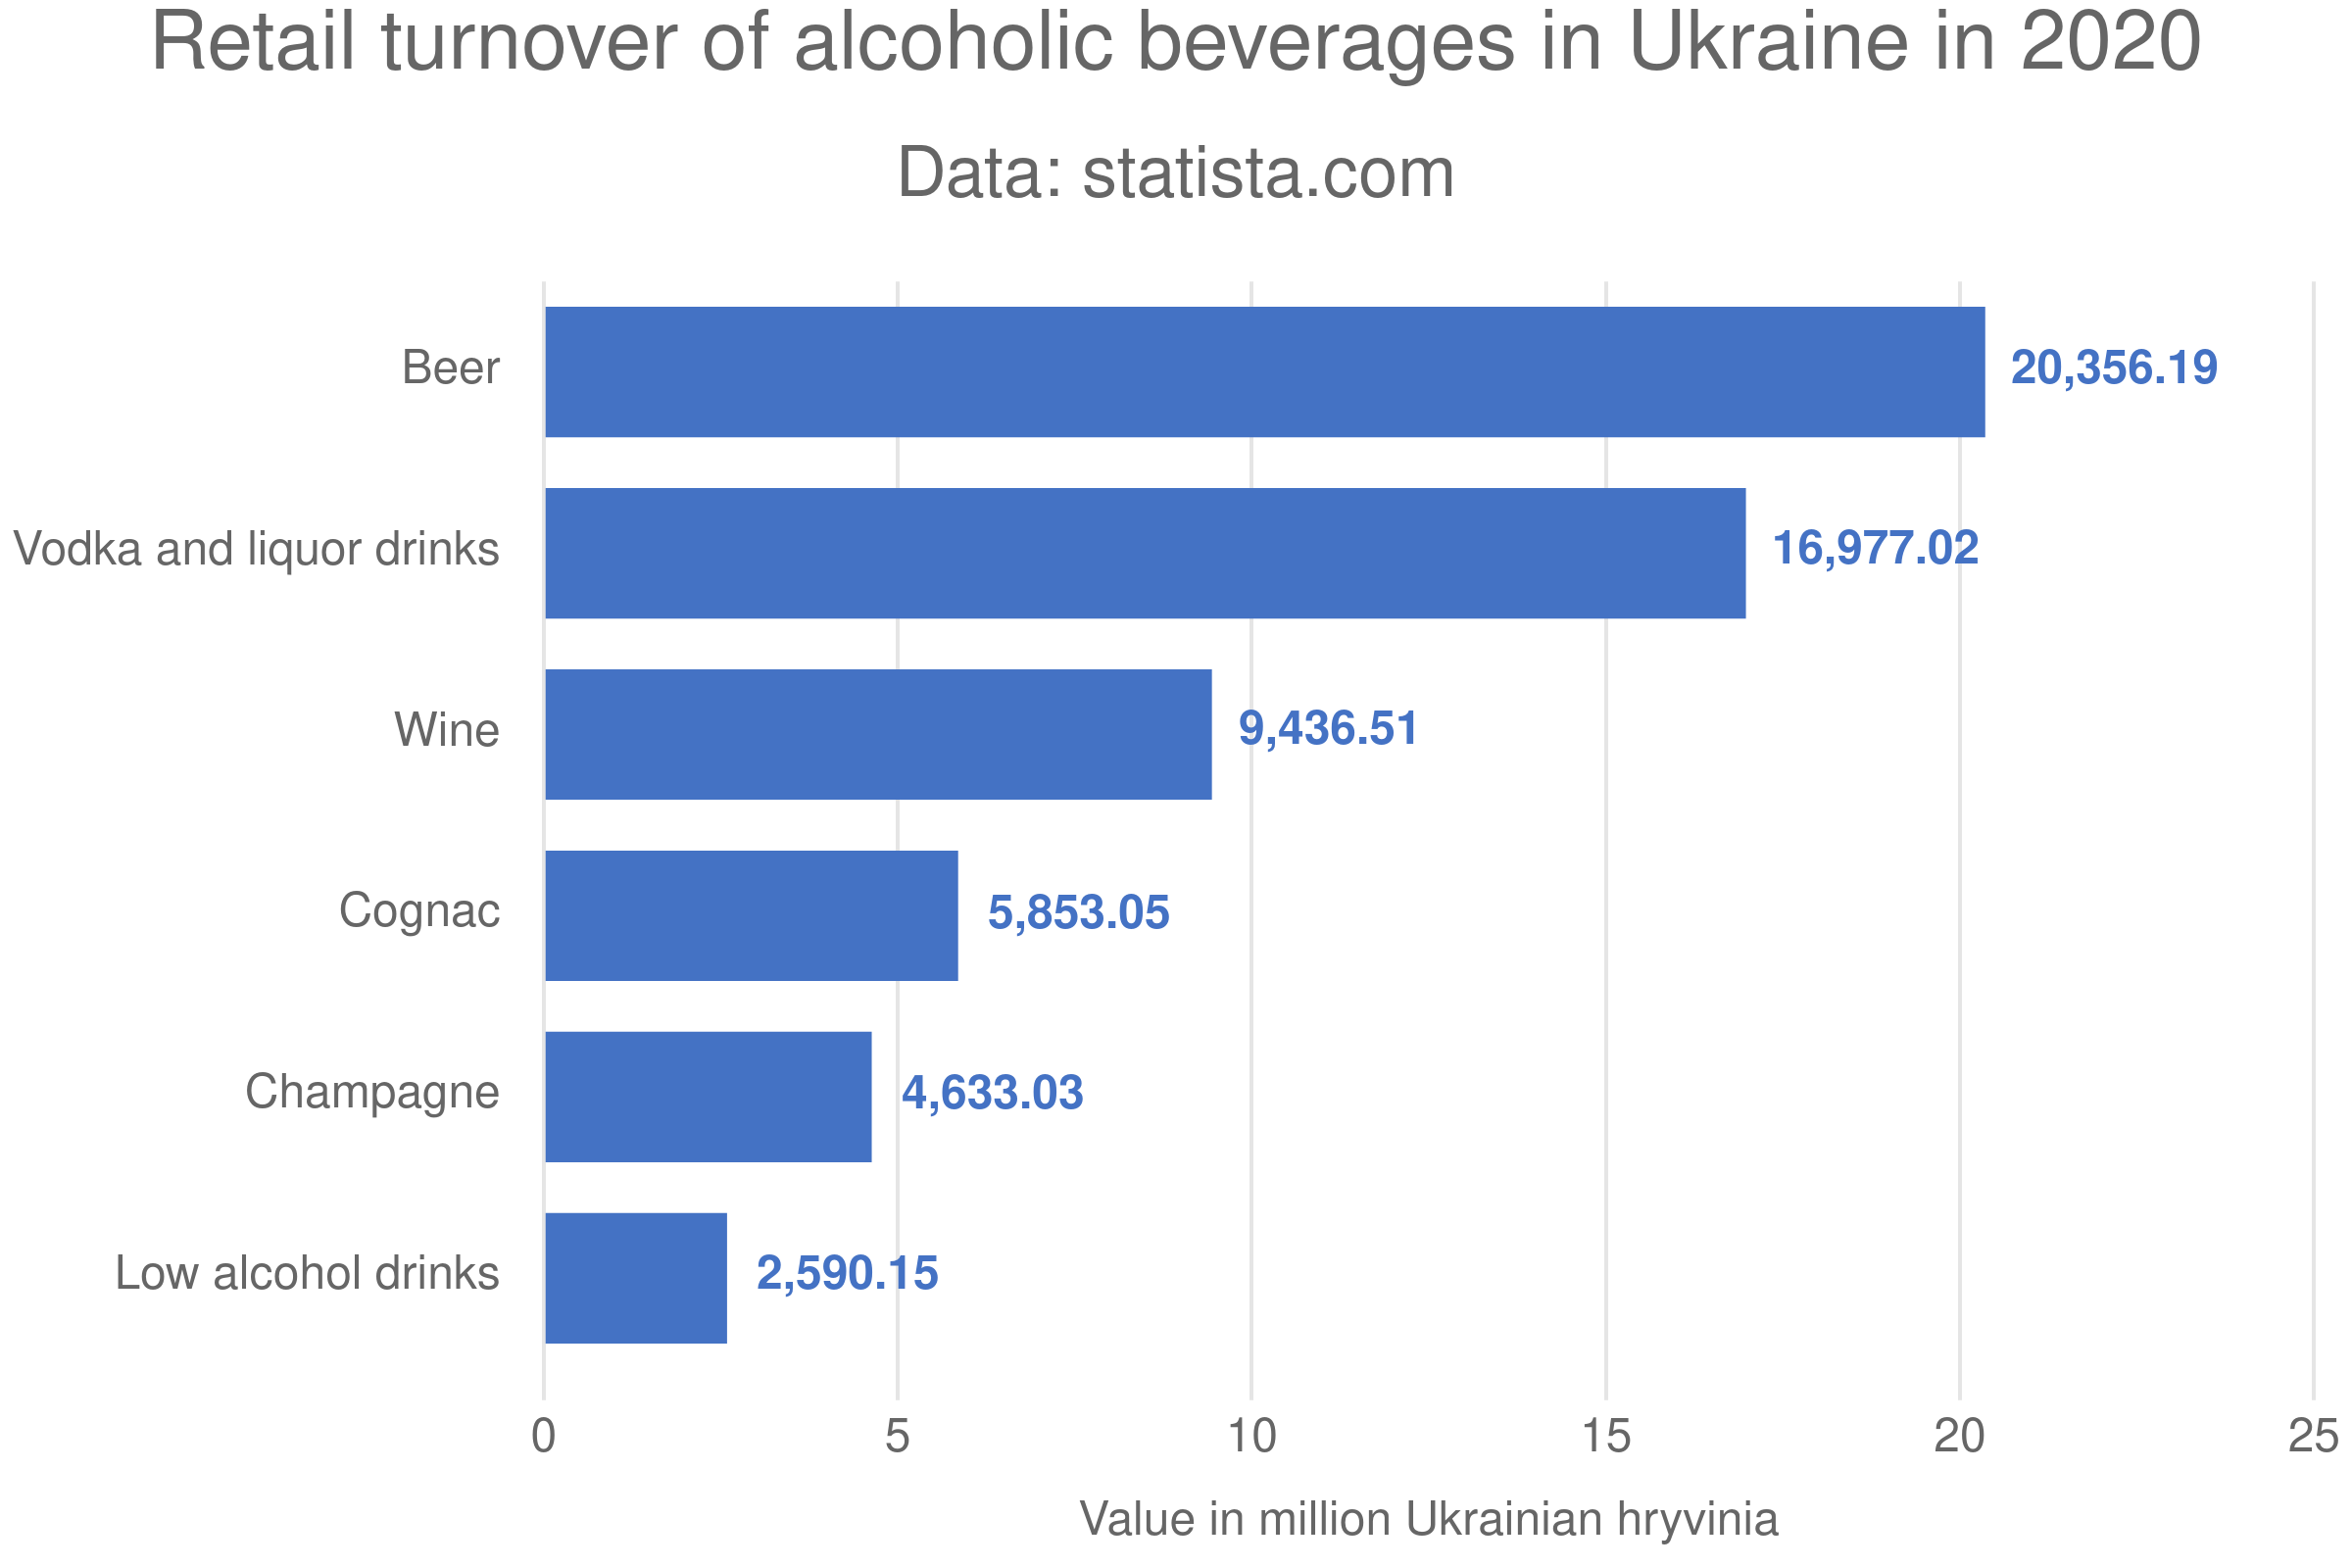 Retail turnover of alcoholic beverages in Ukraine in 2020